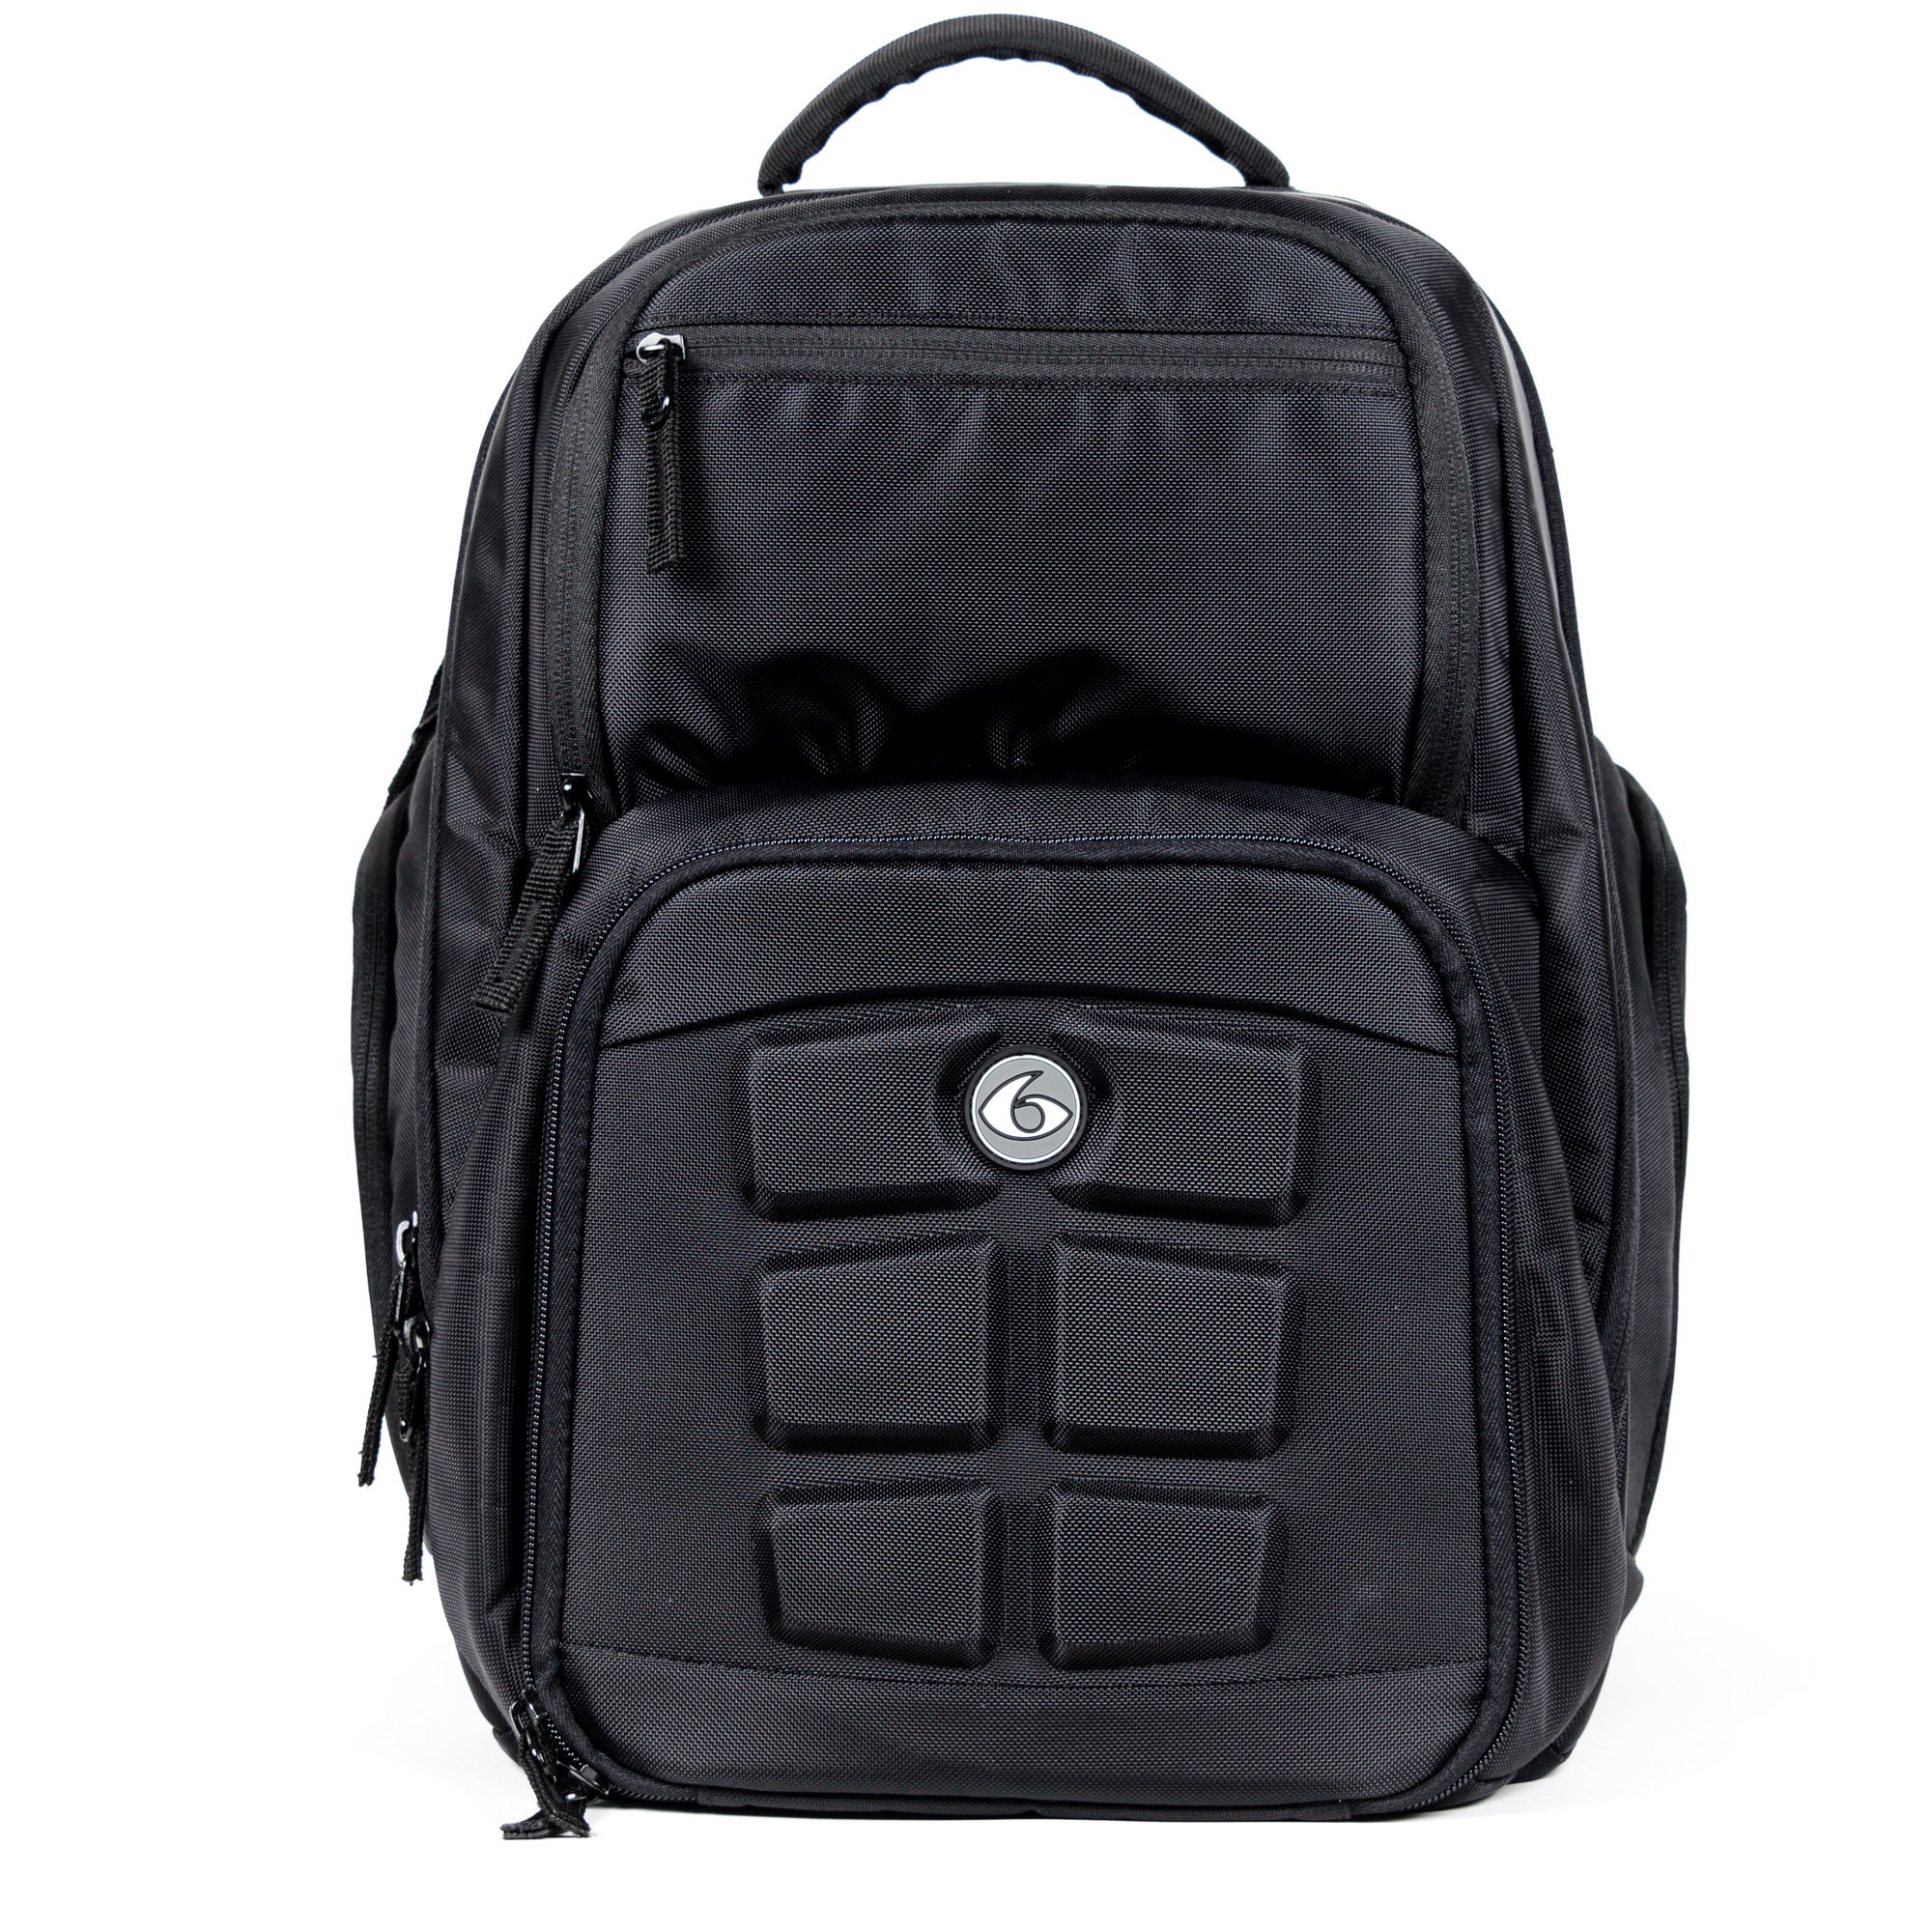 6 Pack Fitness Expedition Backpack 300/500 (рюкзак)